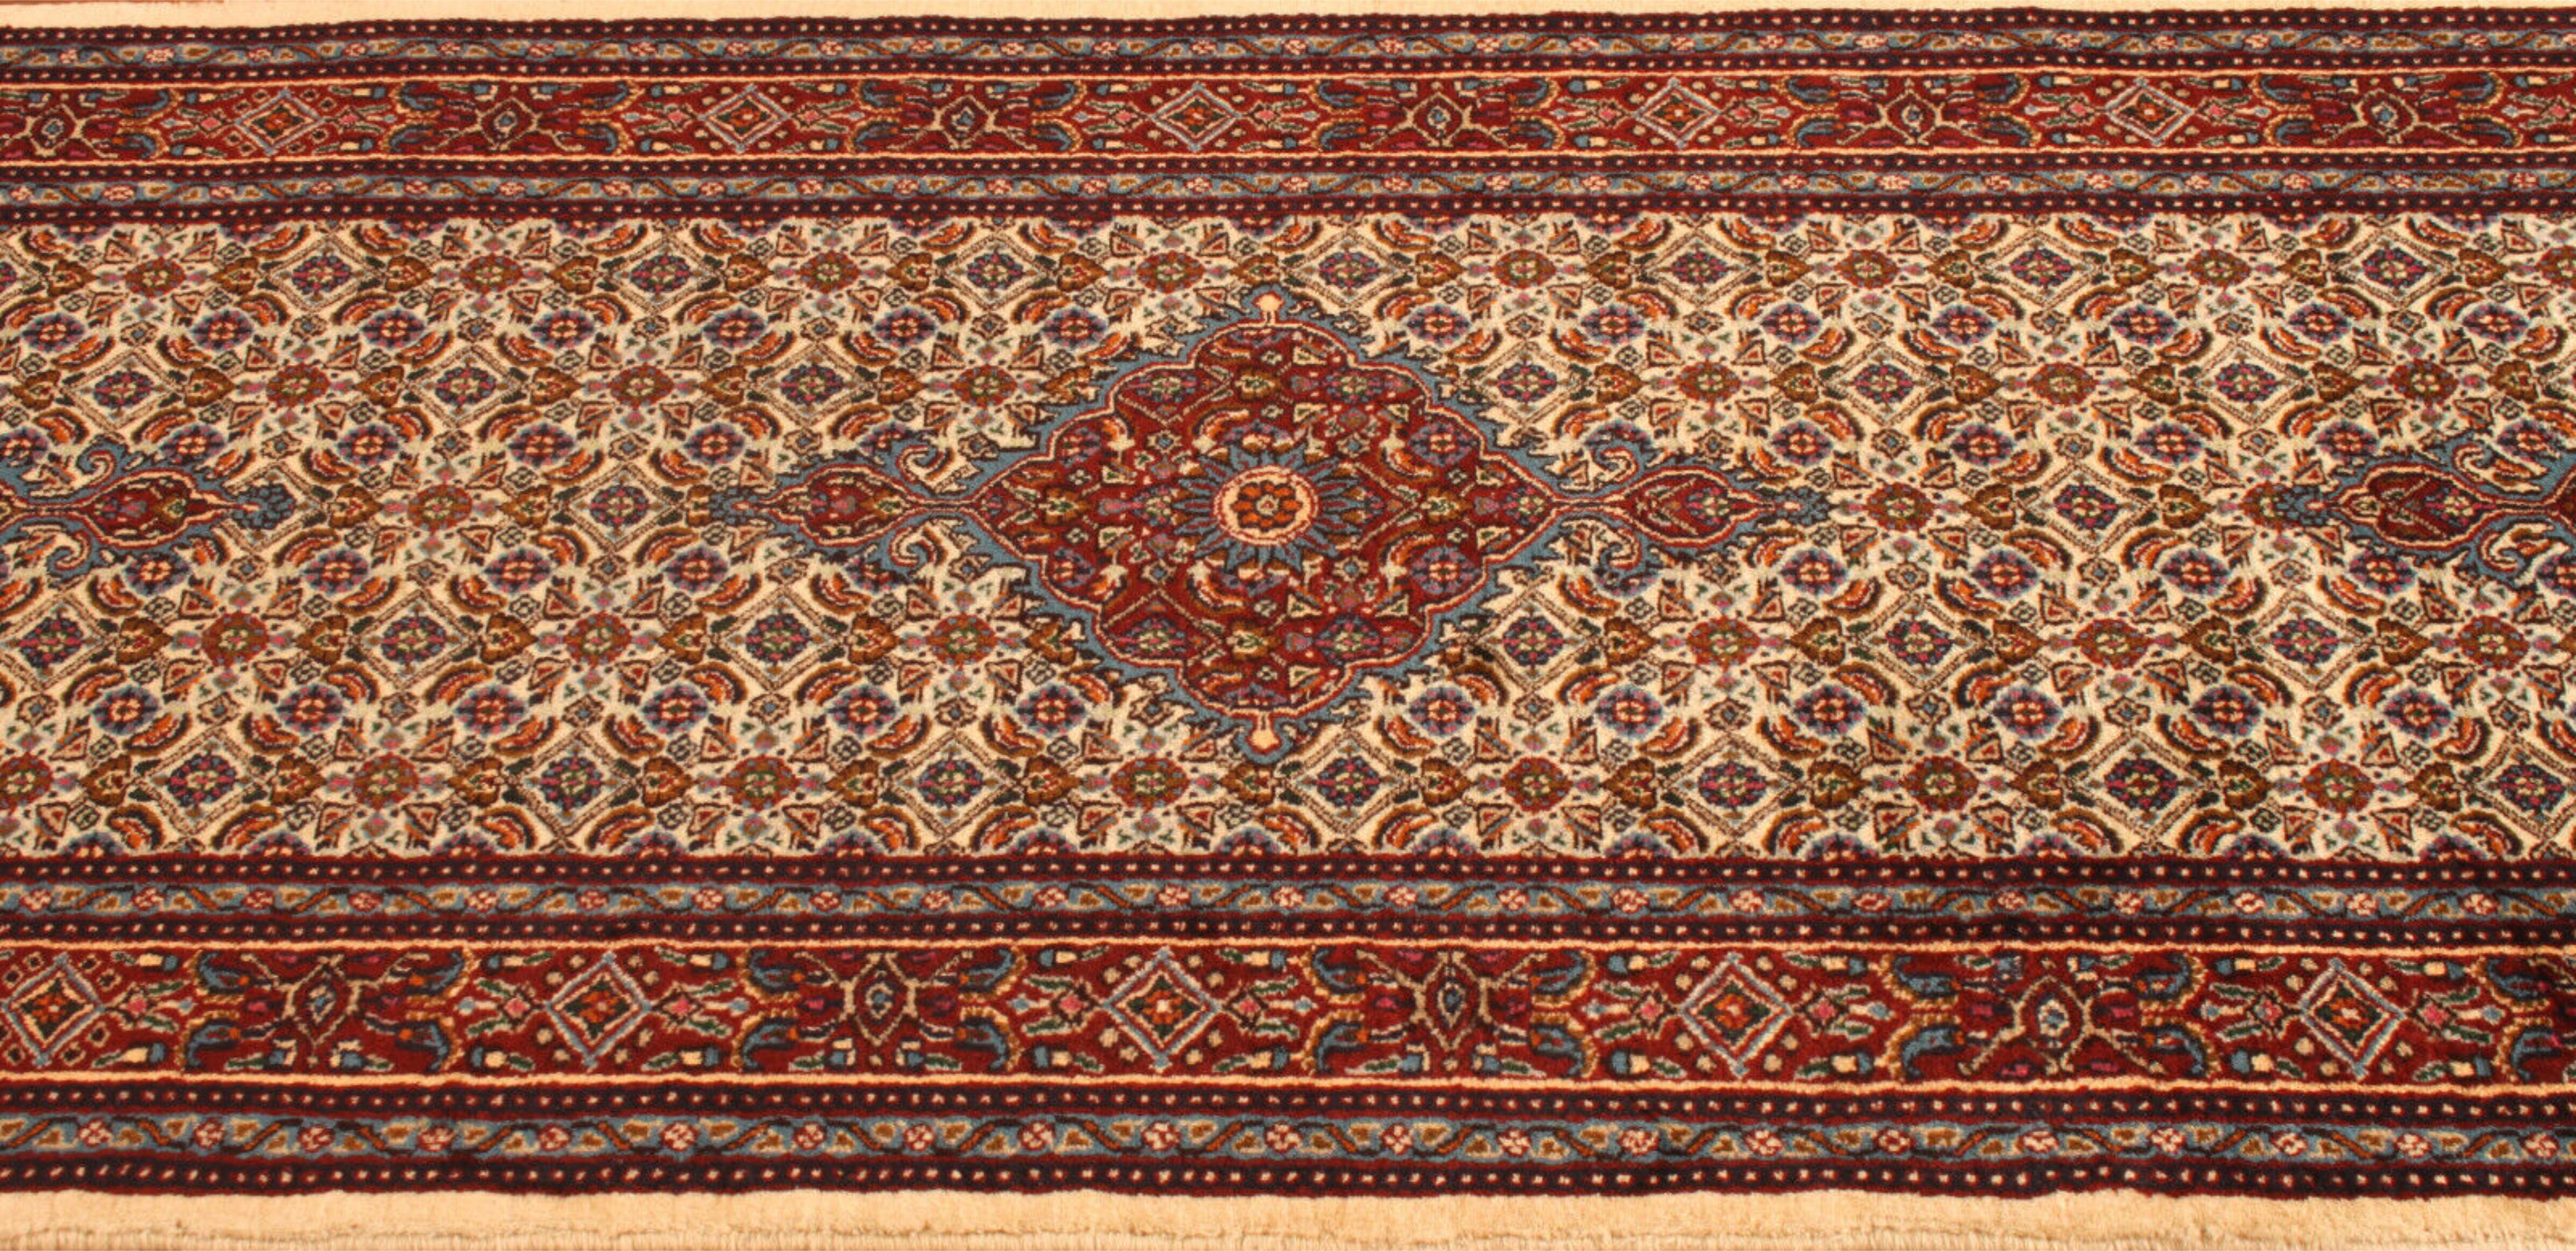 Handmade Vintage Persian Style Moud Runner Rug 2.6' x 9.6', 1980s - 1T51 In Good Condition For Sale In Bordeaux, FR